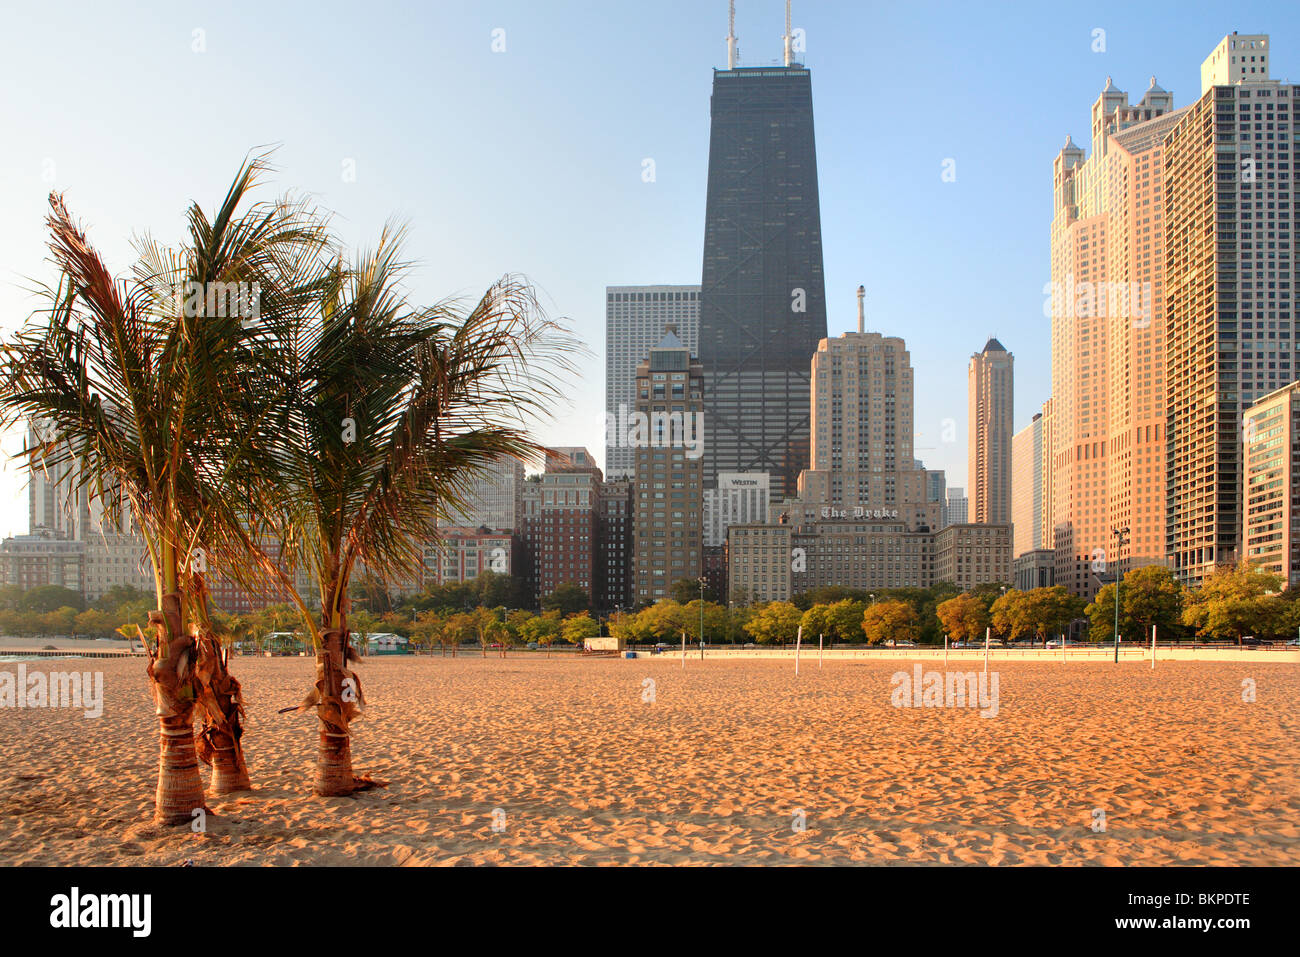 PALM TREES ON OAK STREET BEACH AT THE LAKEFRONT IN DOWNTOWN CHICAGO, ILLINOIS, USA  Stock Photo